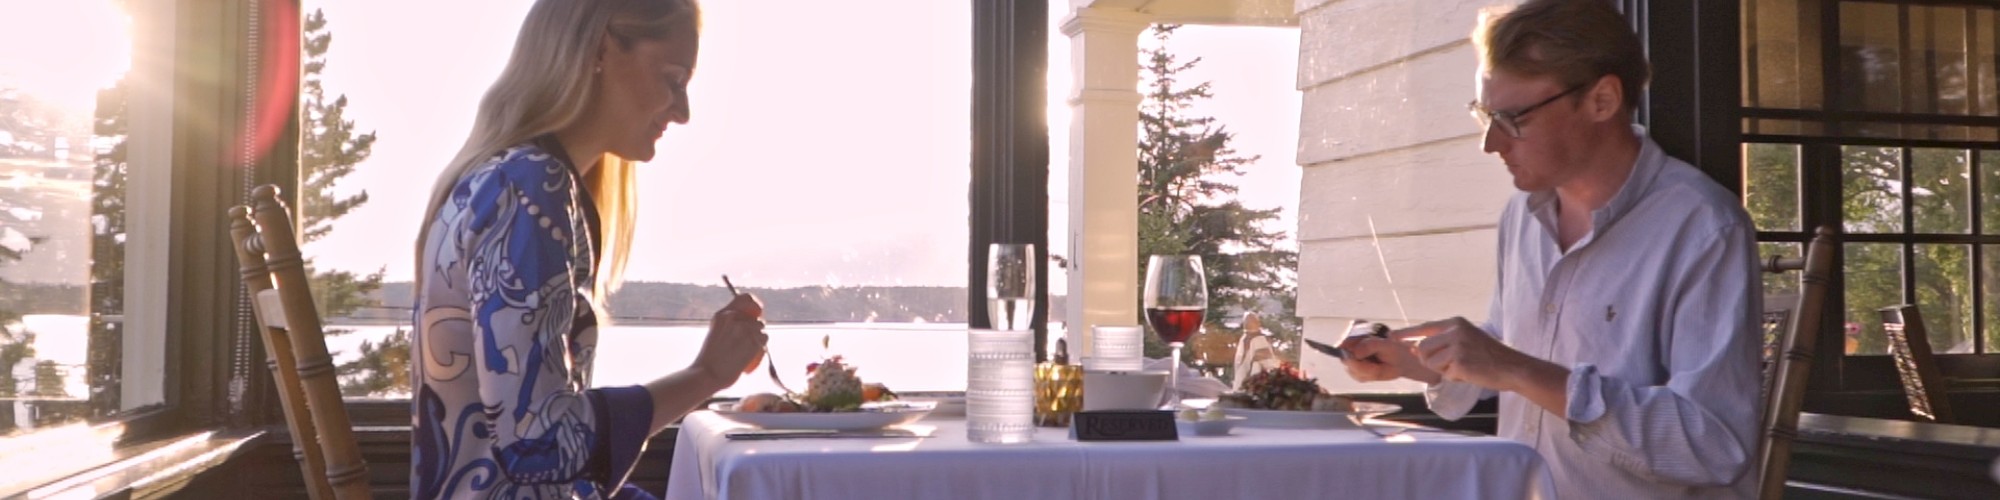 A couple is dining together at a table near large windows with a scenic view of water and trees during sunset.